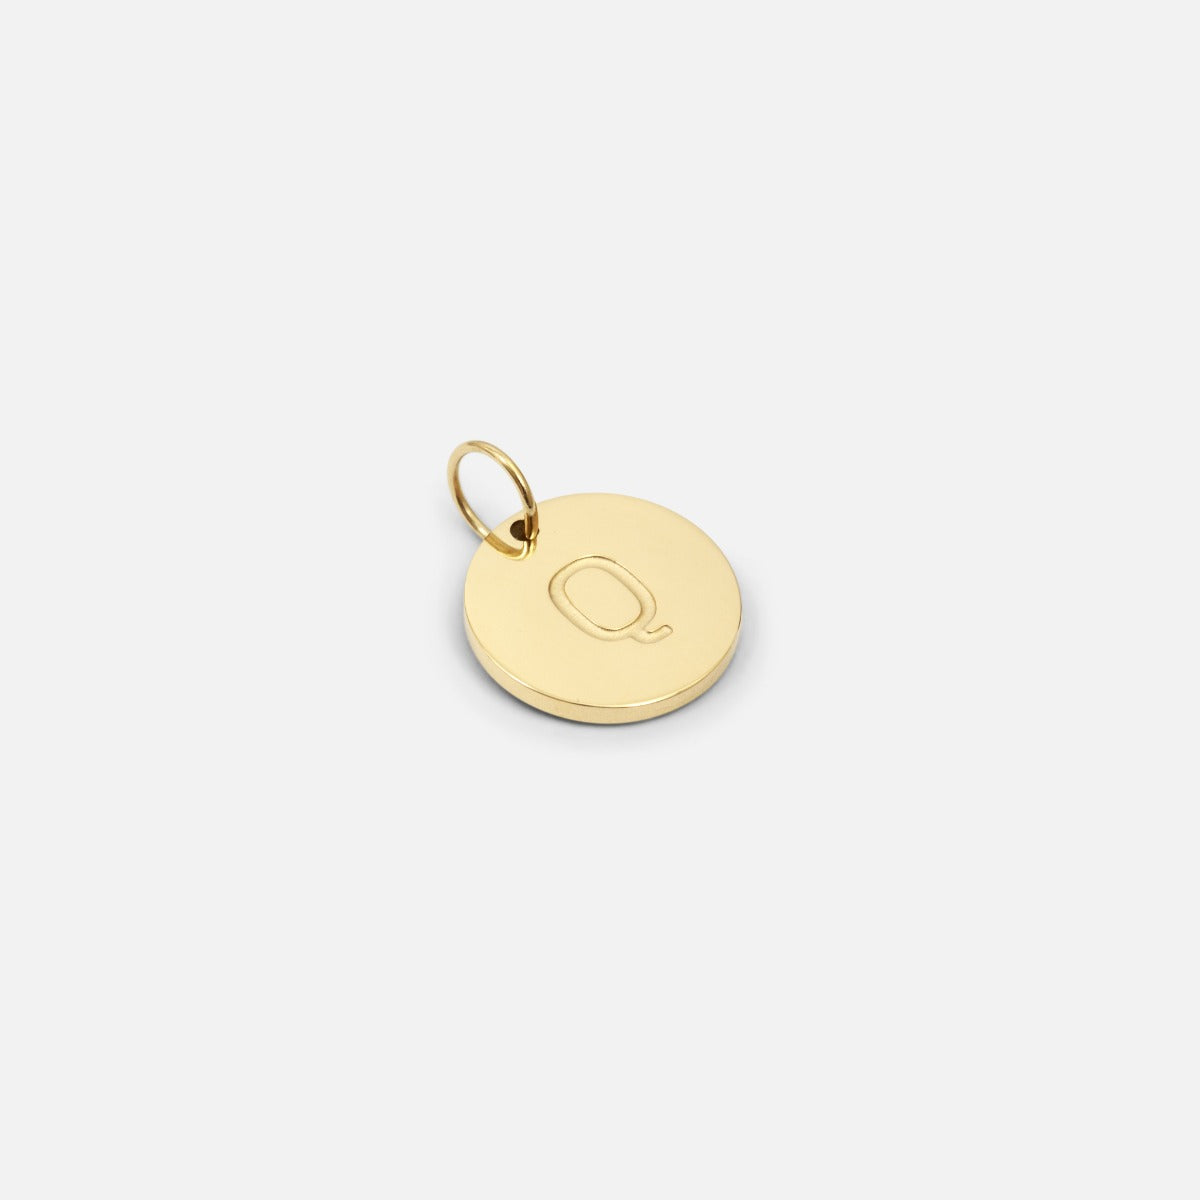 Small symbolic golden charm engraved with the letter of the alphabet "q"